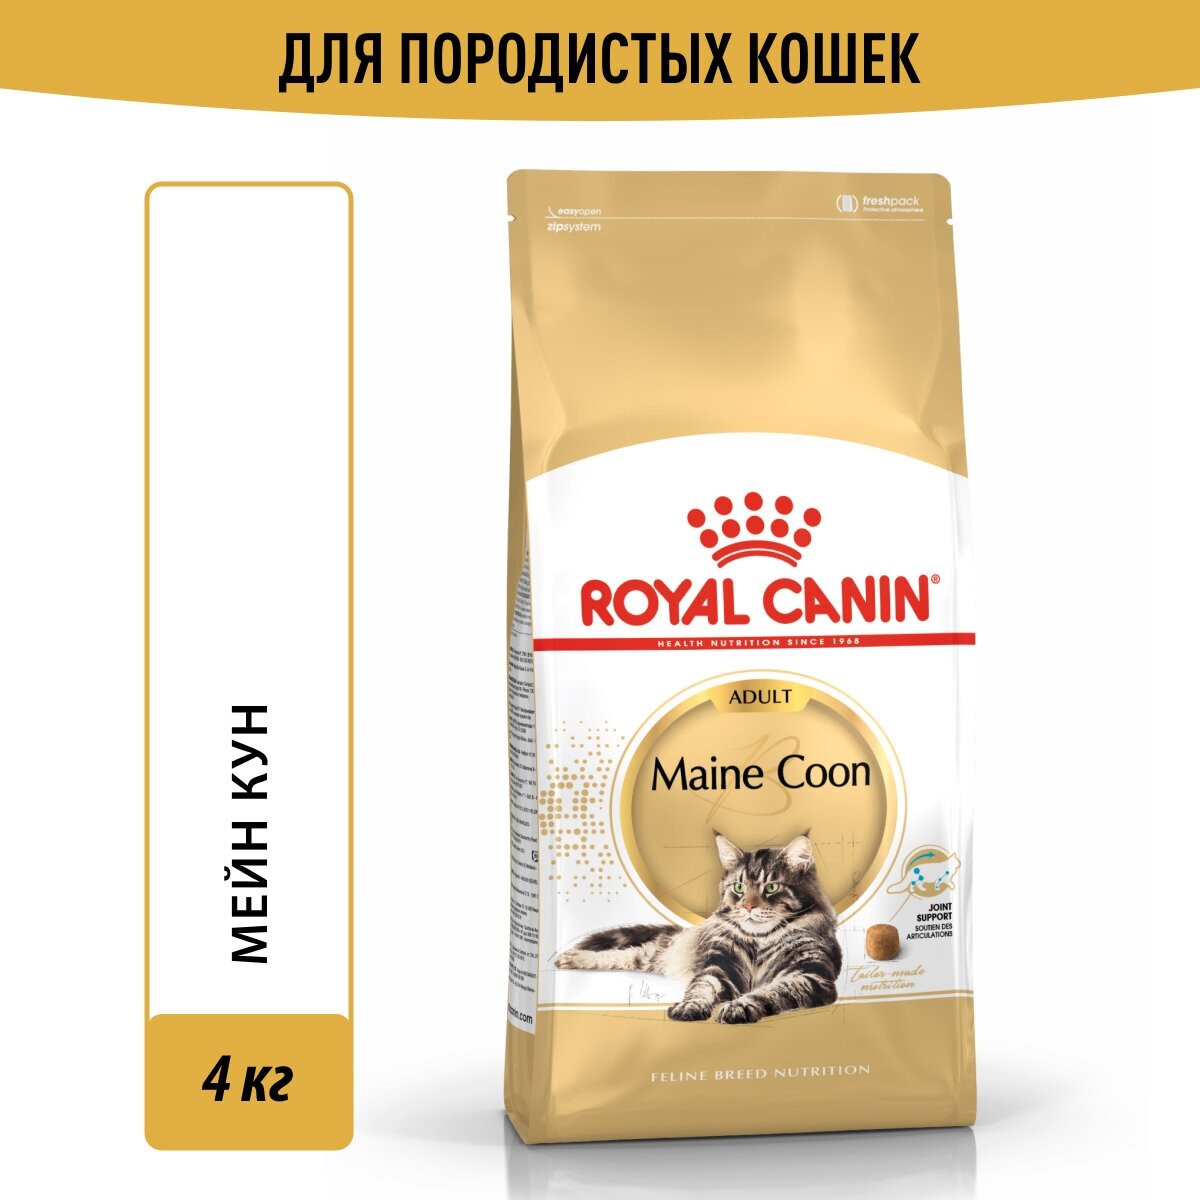     Royal Canin Maine Coon Adult 4 